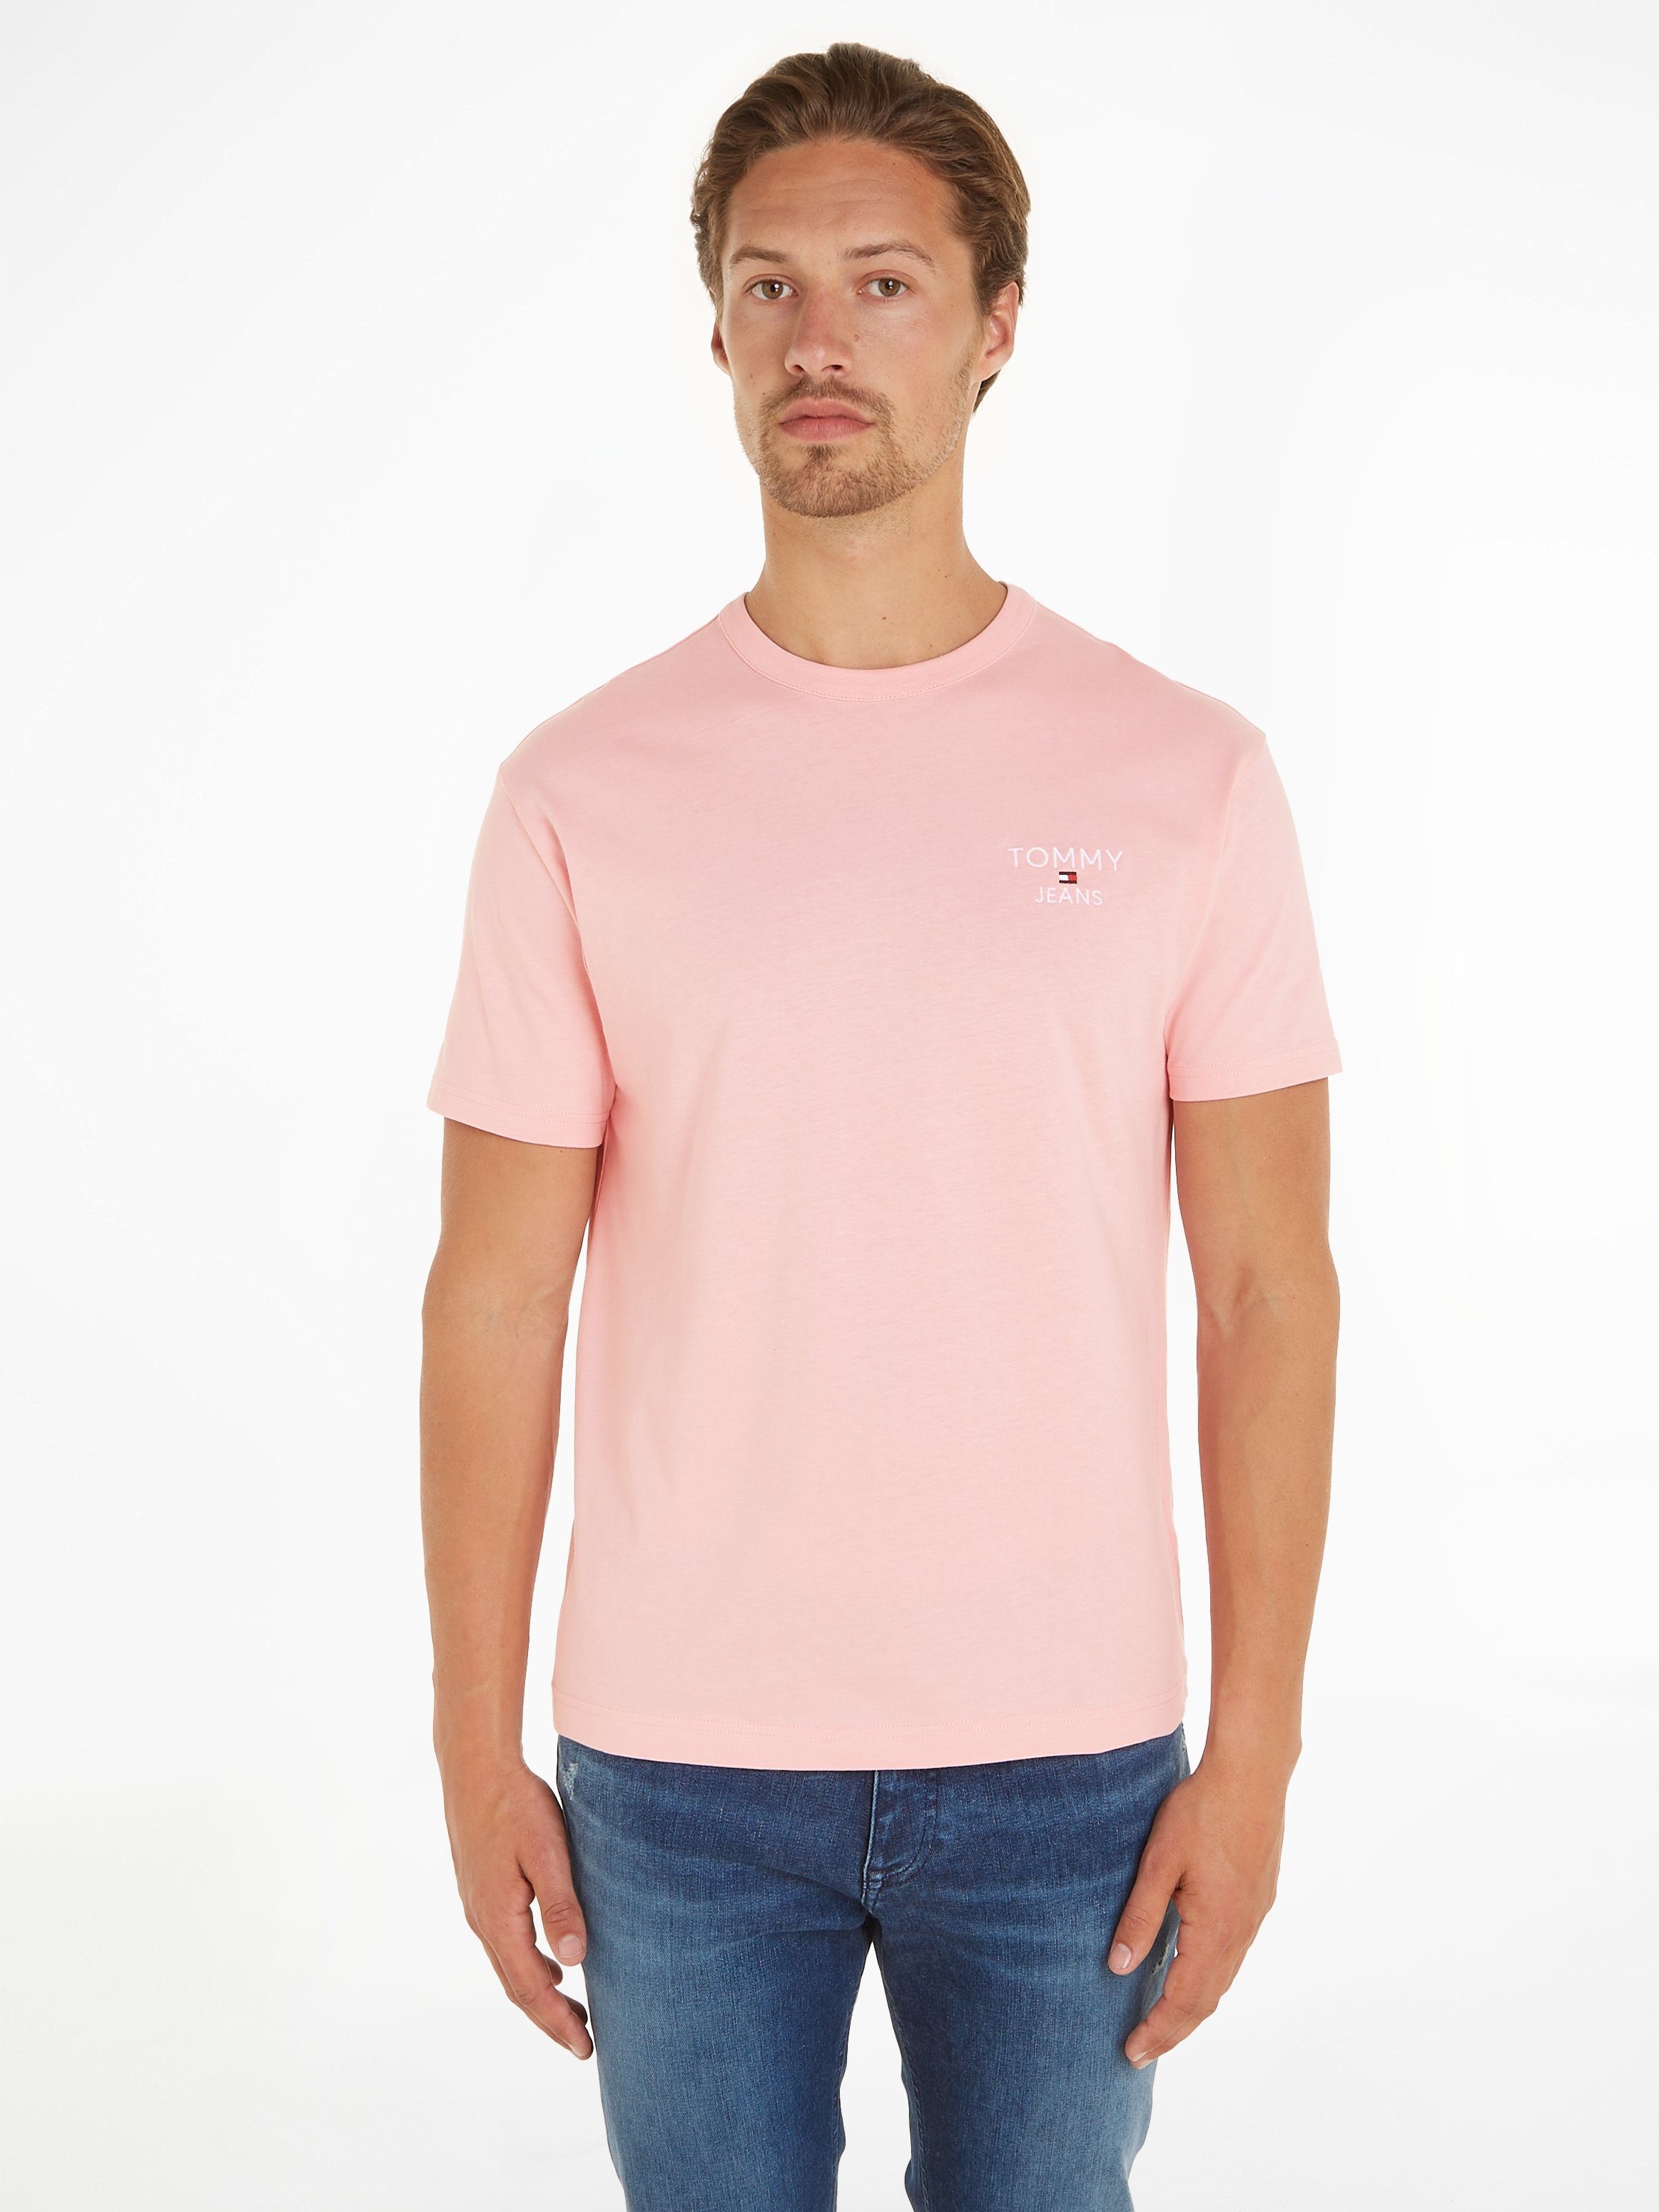 Tommy Jeans T-Shirt TJM REG CORP TEE EXT mit Tommy Jeans Stickerei